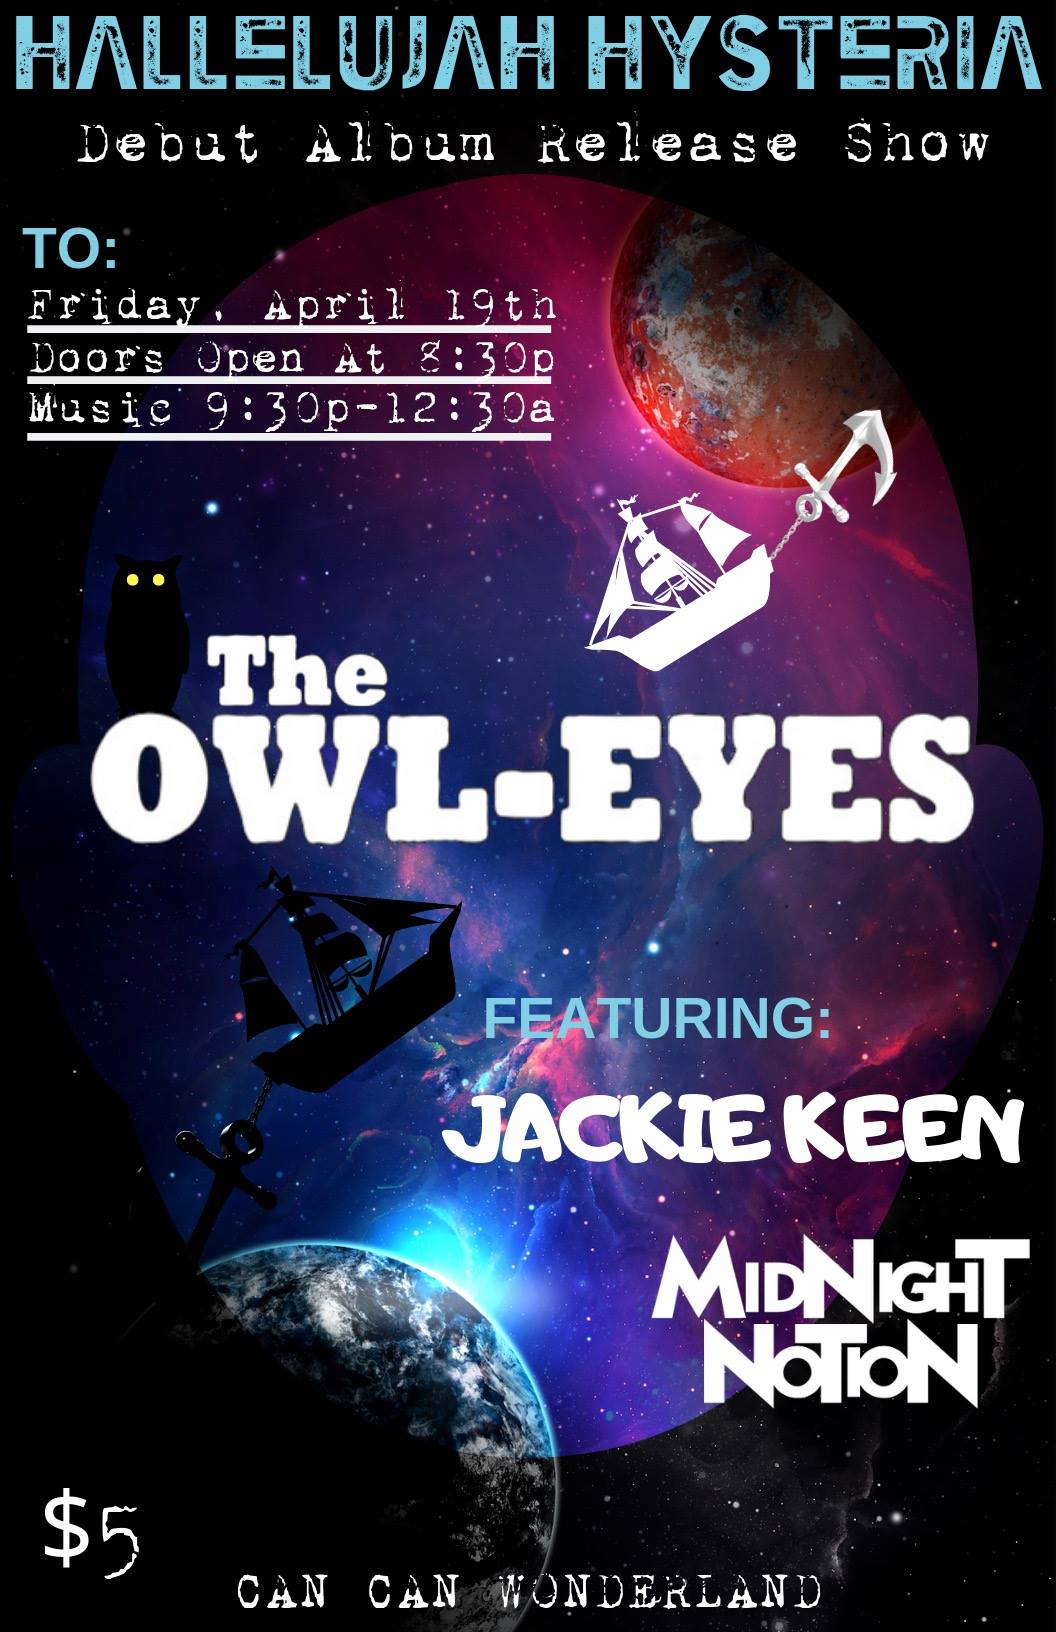 A poster for the Hallelujah Hysteria album release show. It has a purple and blue spacey background with planets and flying ships. A mixture of blue and white text gives the show details and band names: The Owl-Eyes, Jackie Keen, and Midnight Notion.